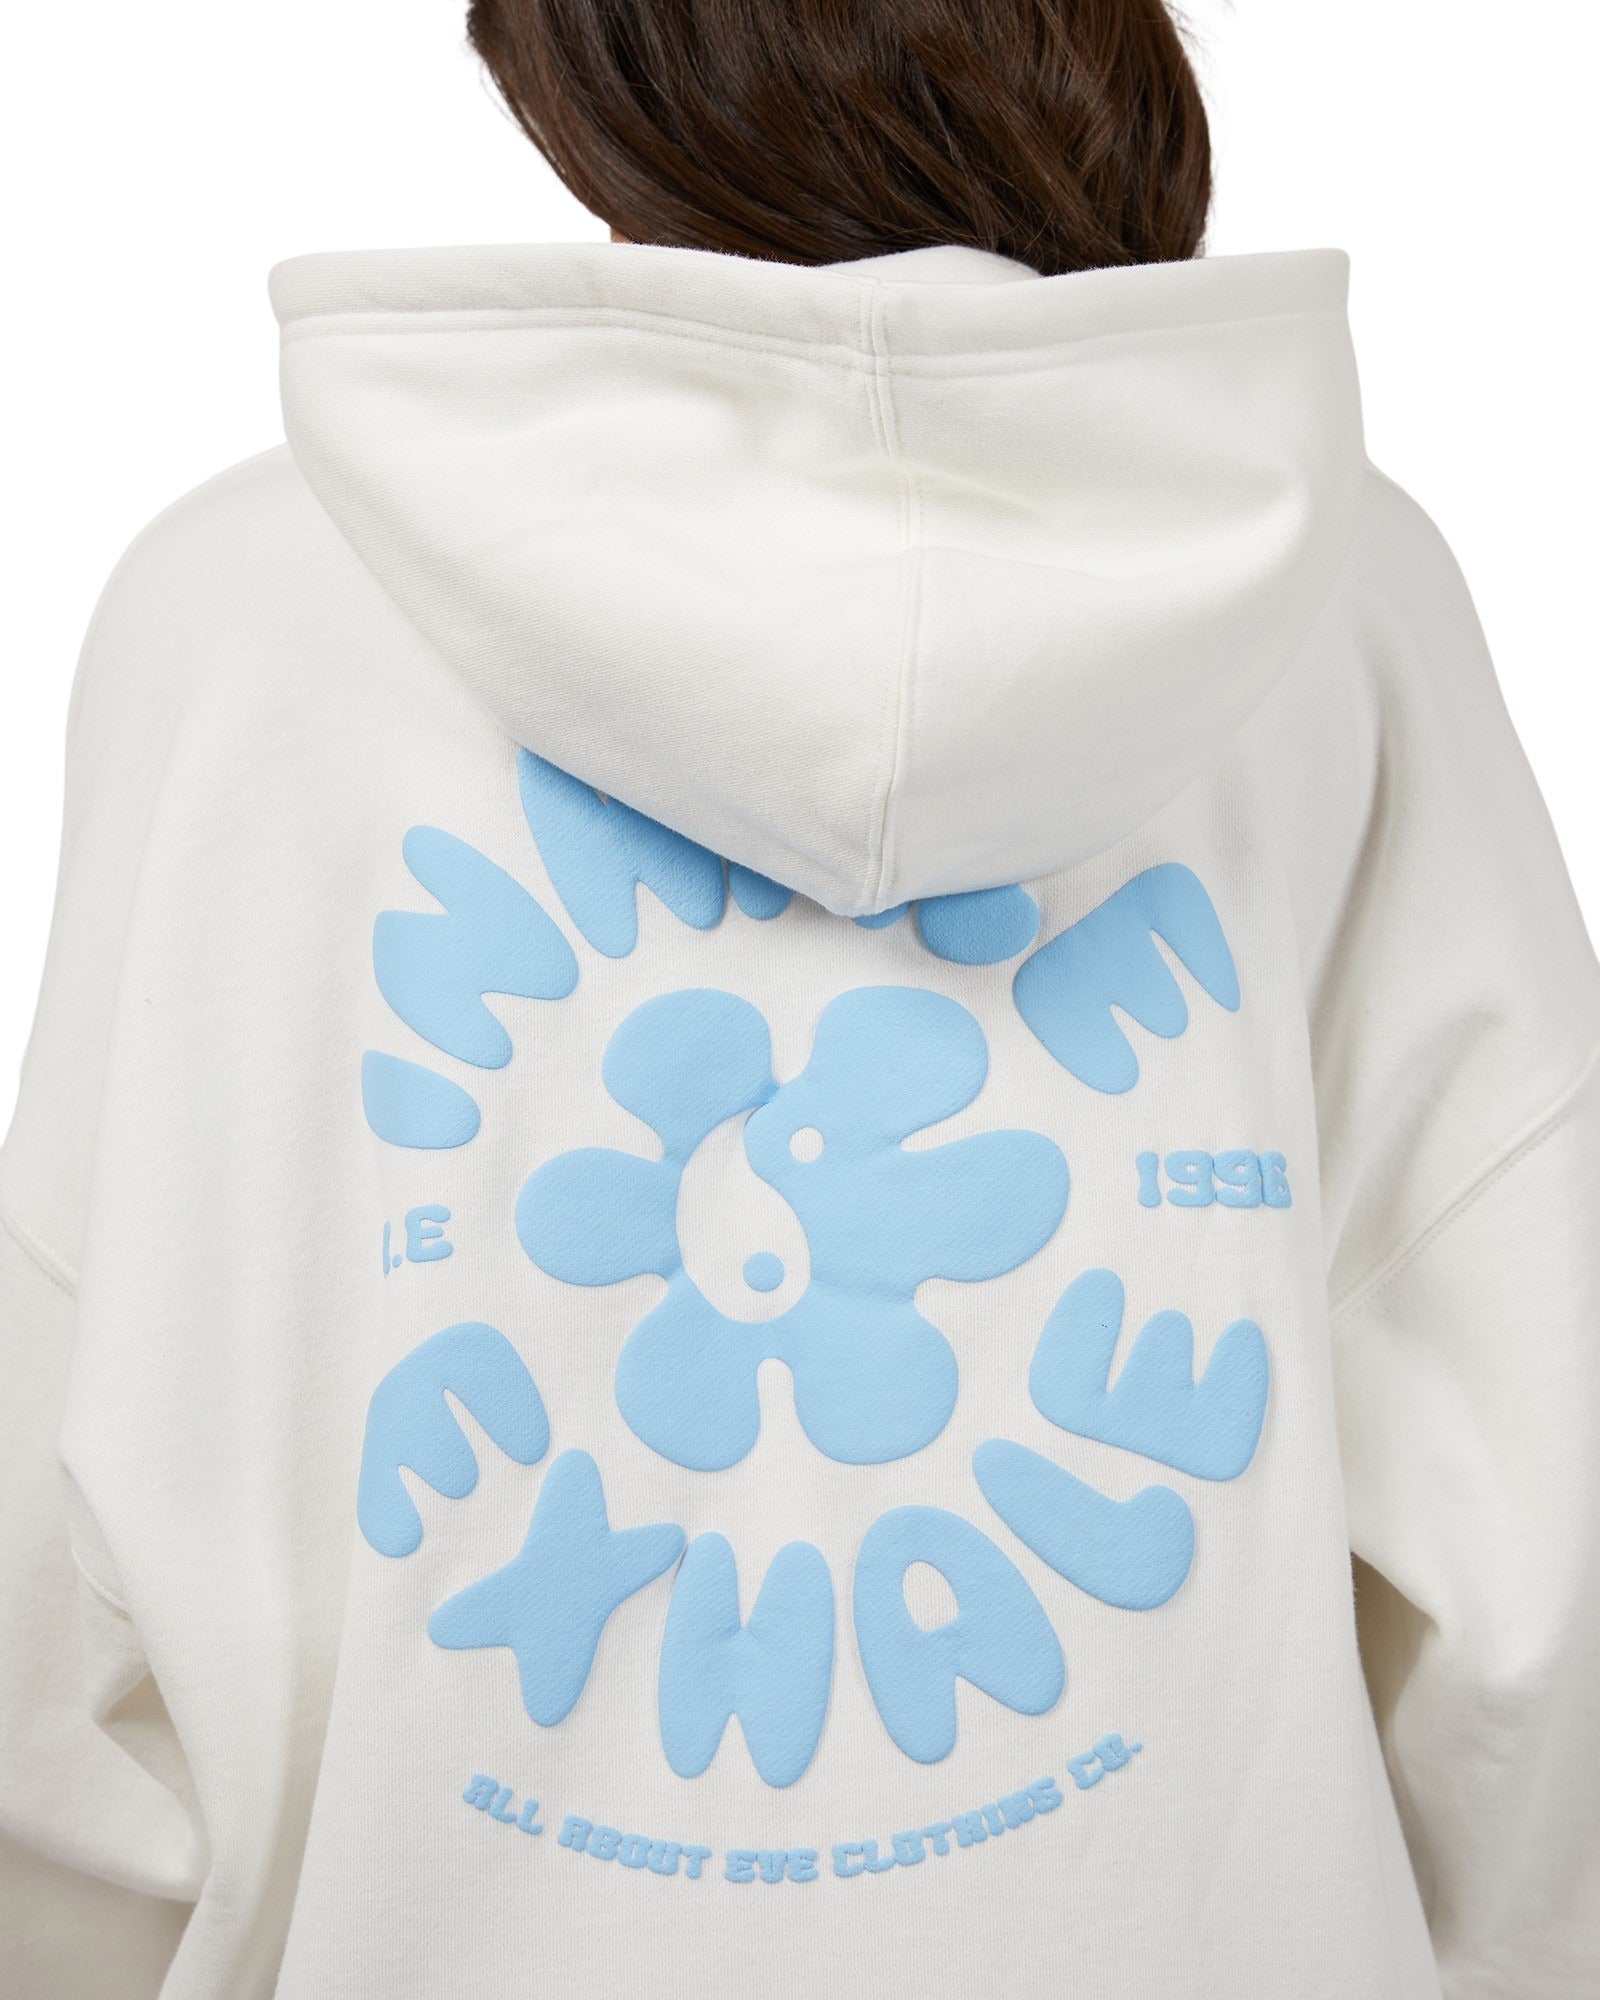 All About Eve - Exhale Hoody - Vintage White